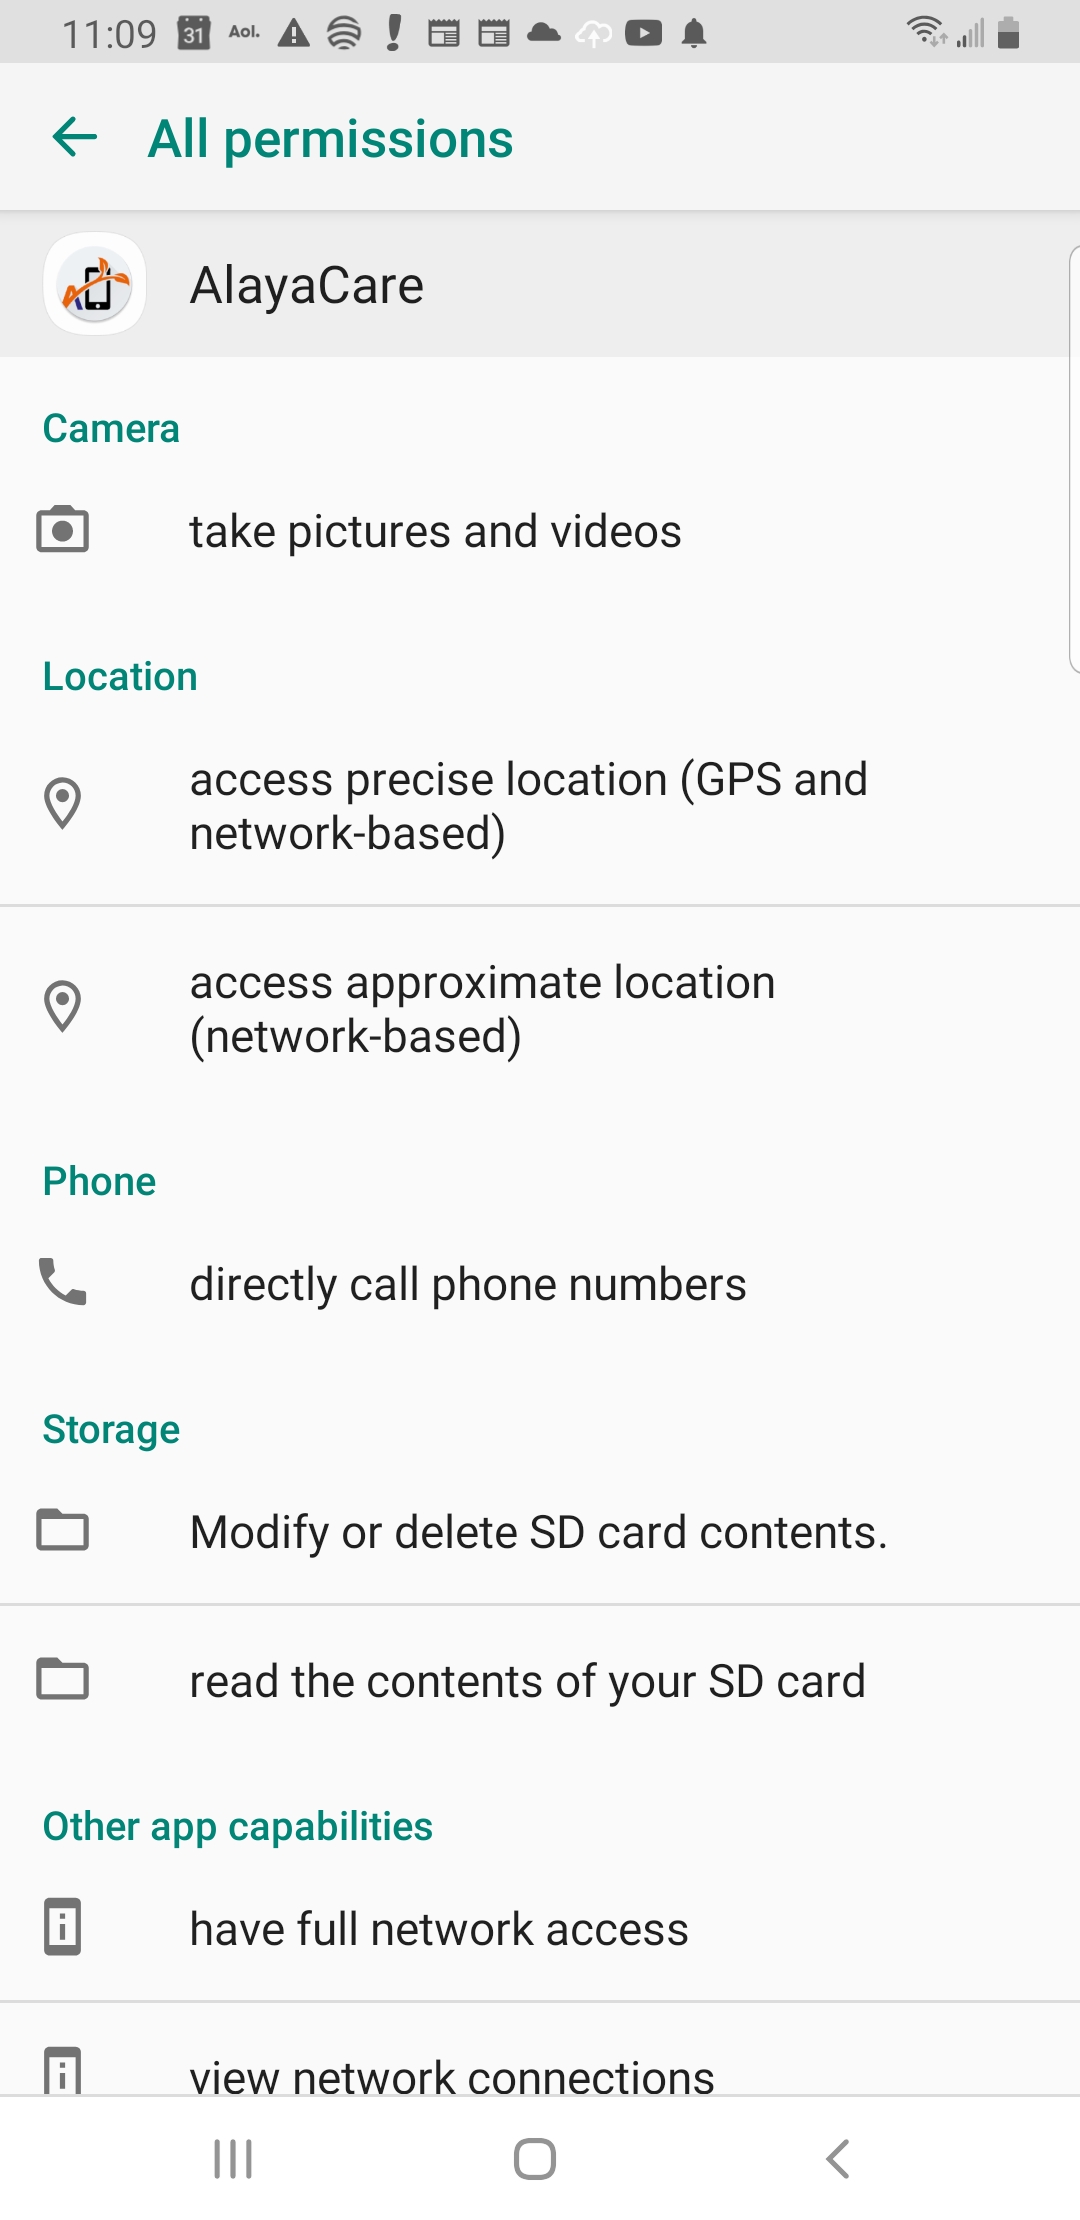 permissions_android_app.jpg